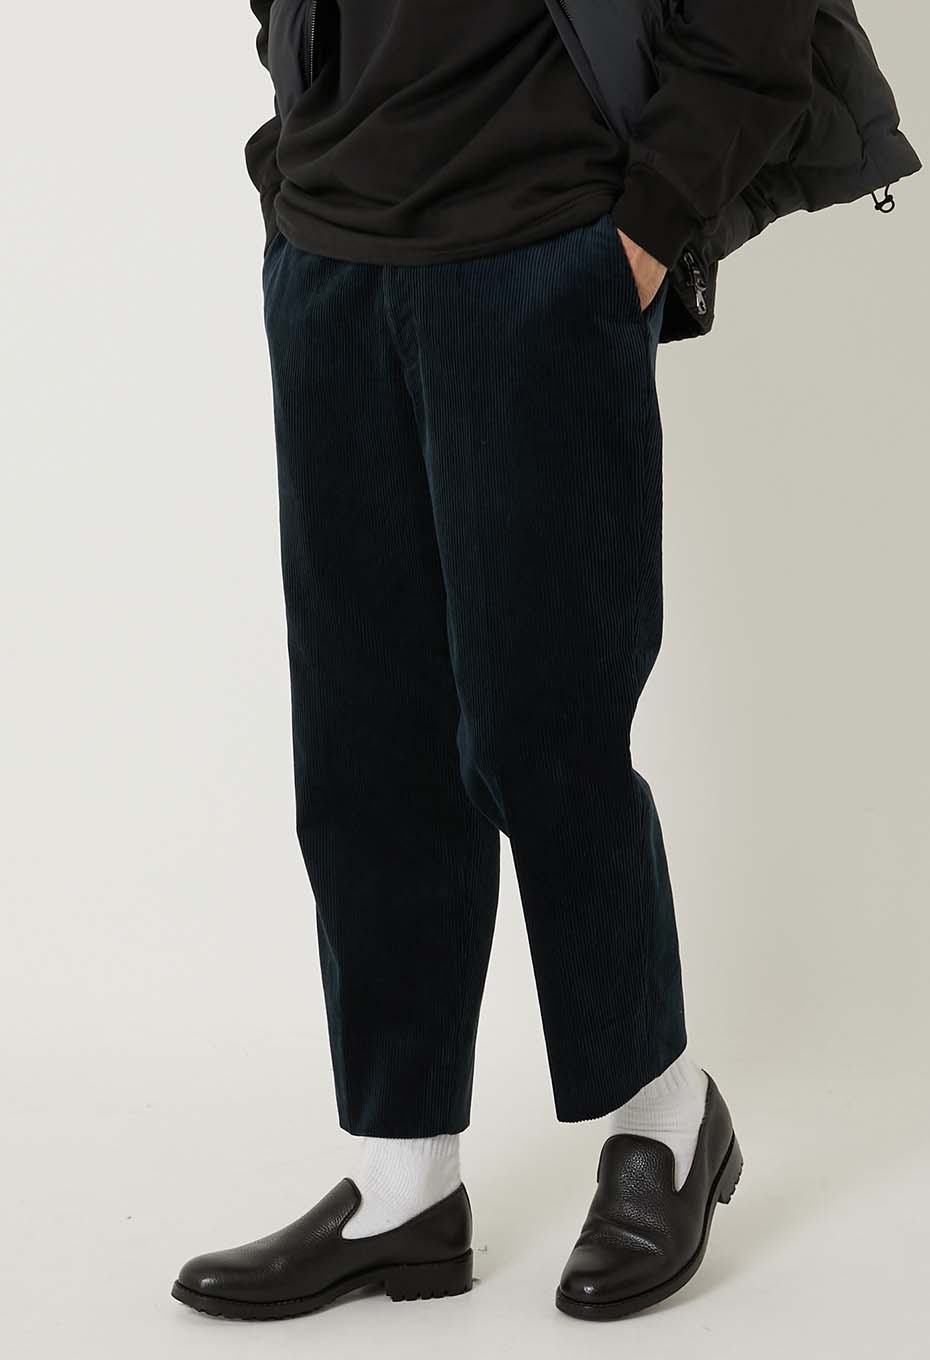 ENDS AND MEANS Grandpa Cord Trousers